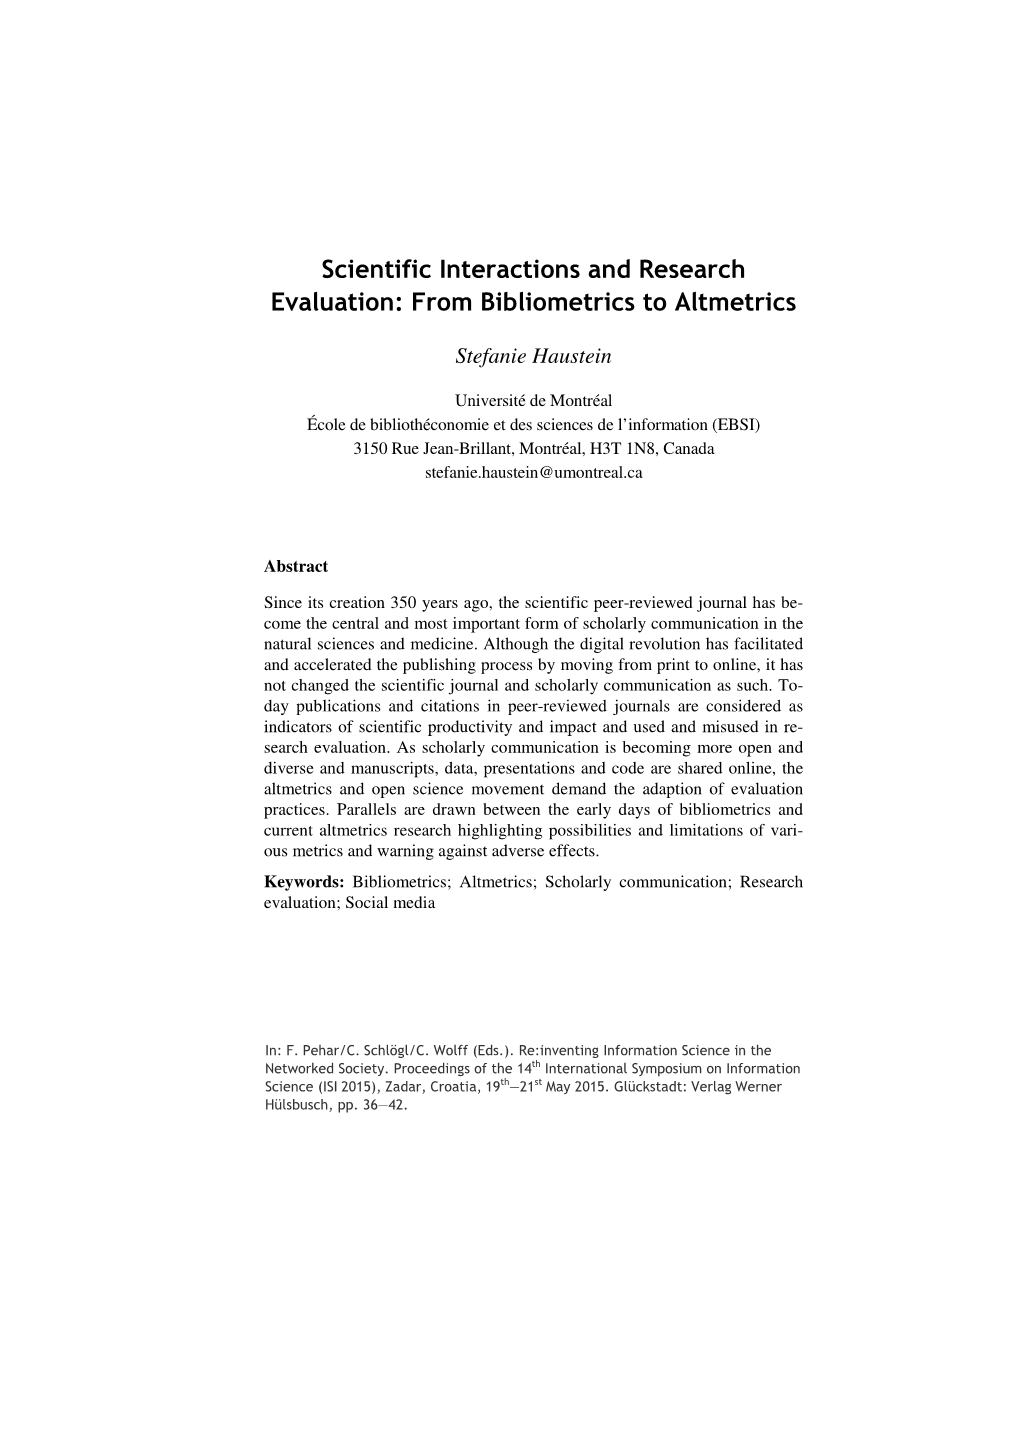 Scientific Interactions and Research Evaluation: from Bibliometrics to Altmetrics